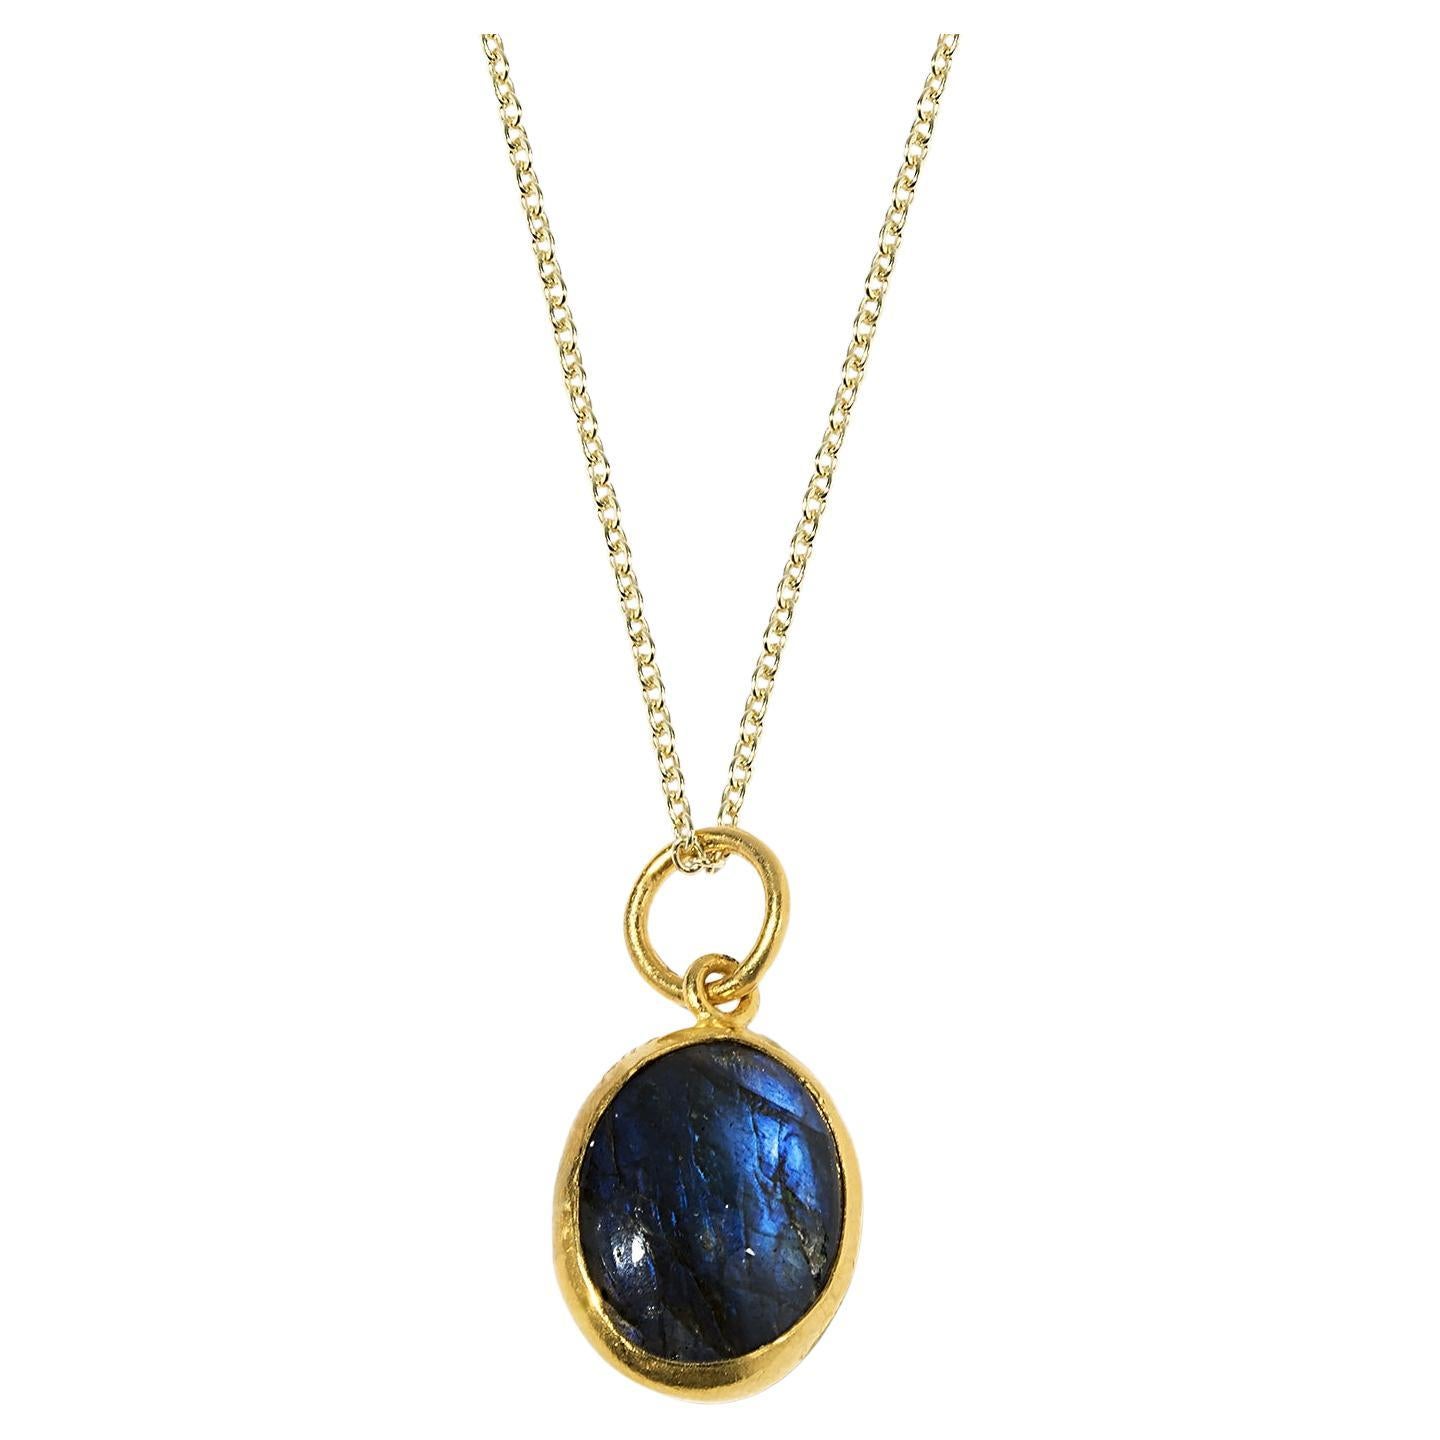 Smooth, Oval 5.45 Ct Labradorite Charm Pendant Necklace, 24kt Solid Gold